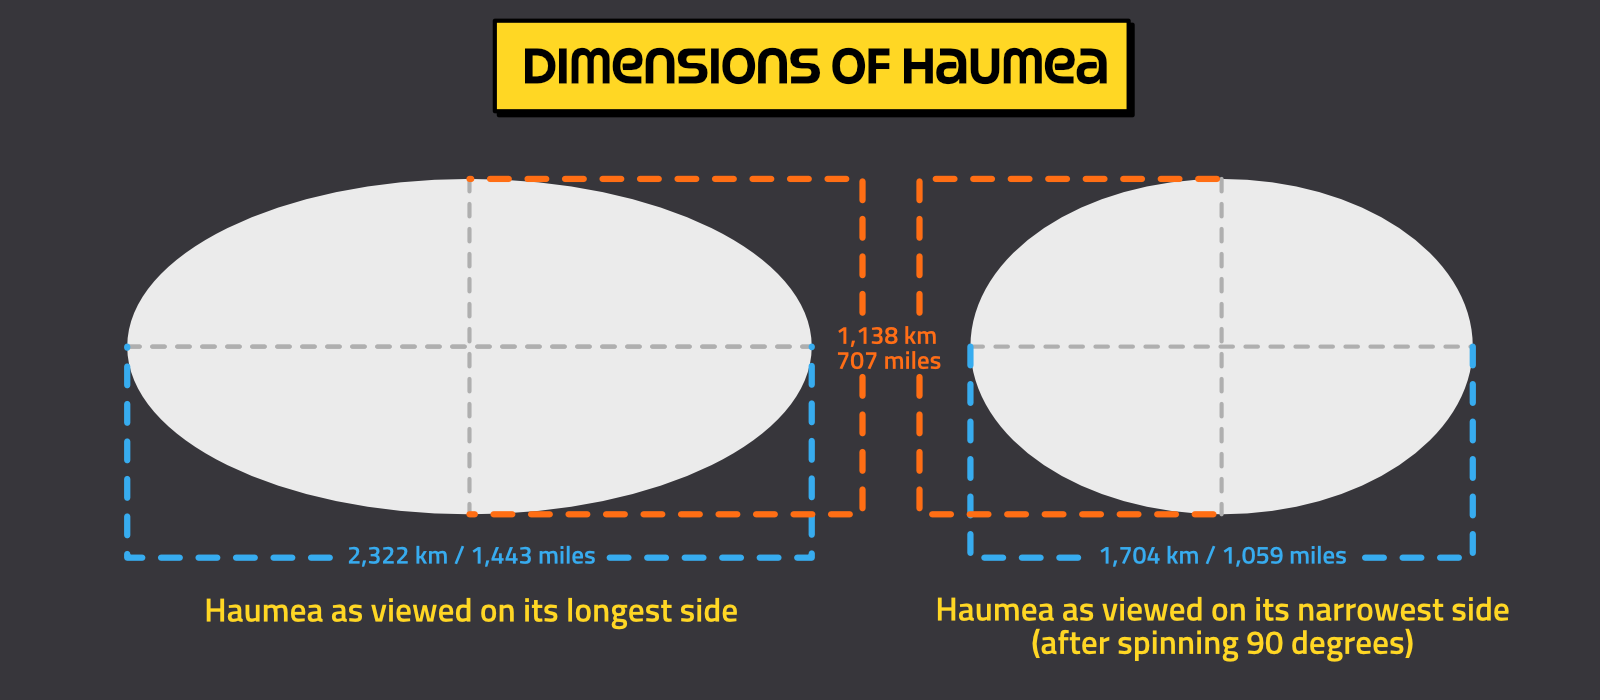 Size and dimensions of dwarf planet Haumea